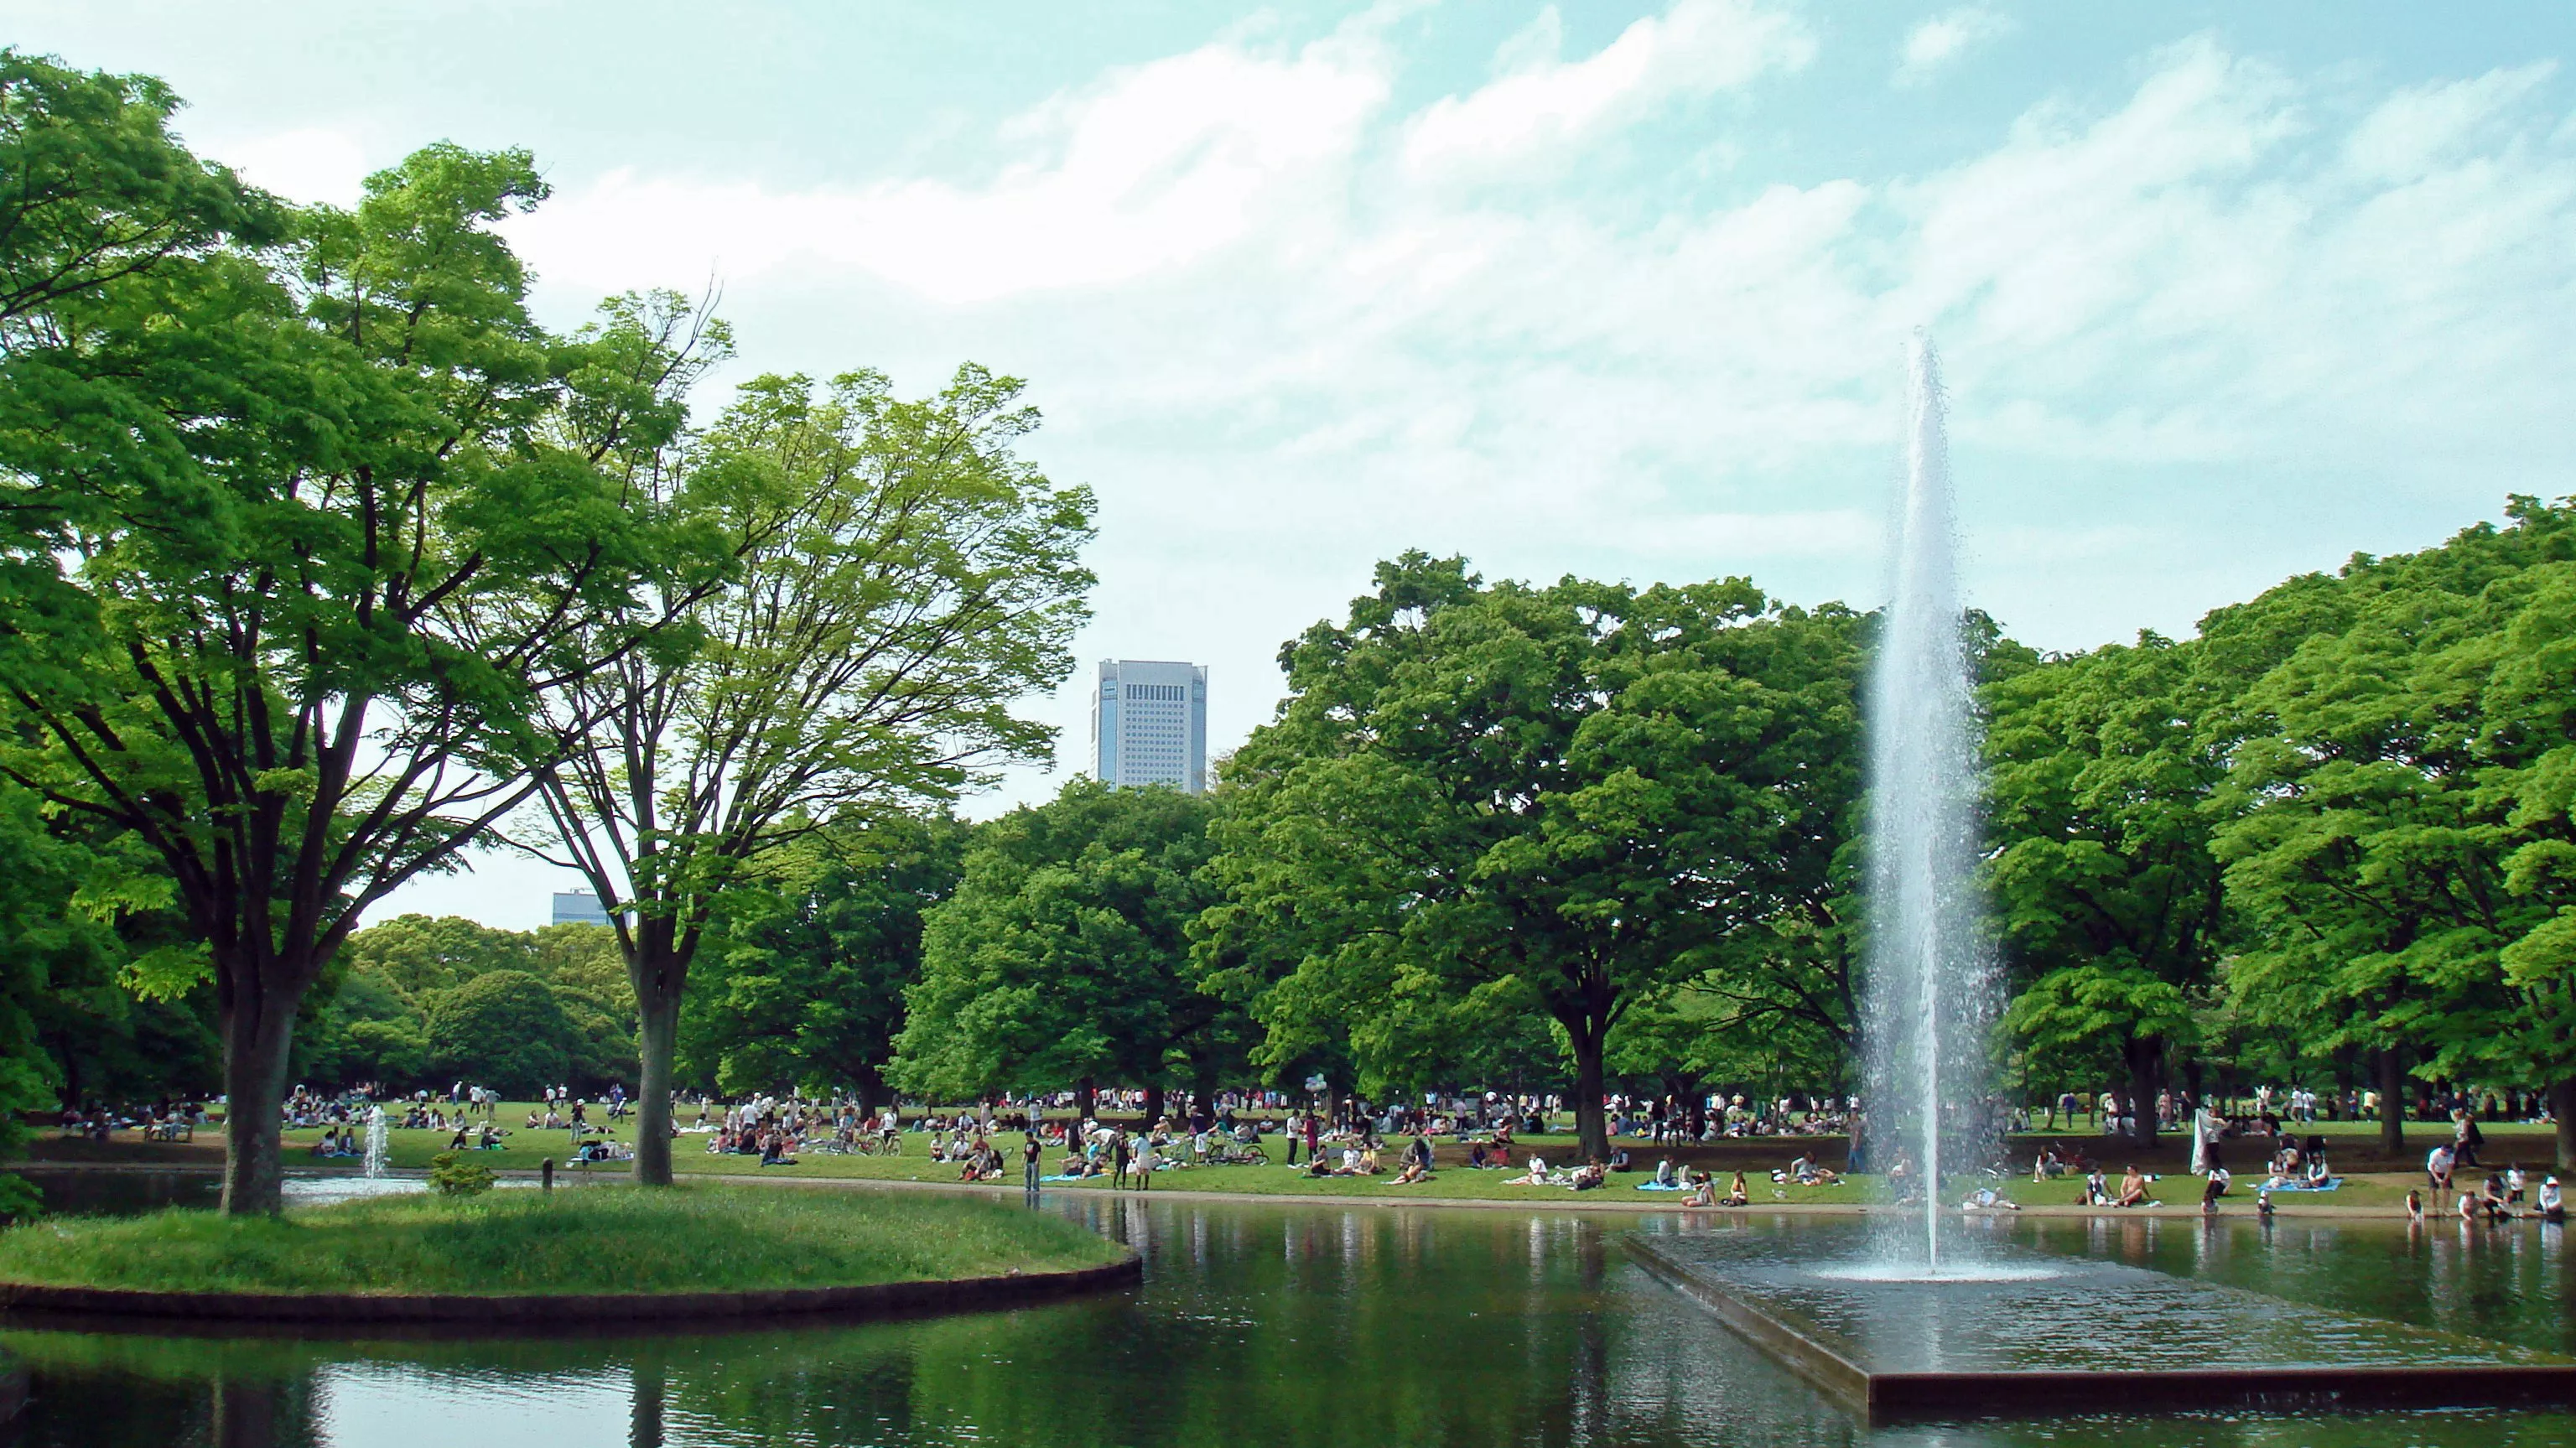 Yoyogi Park in Japan, East Asia | Parks - Rated 3.9